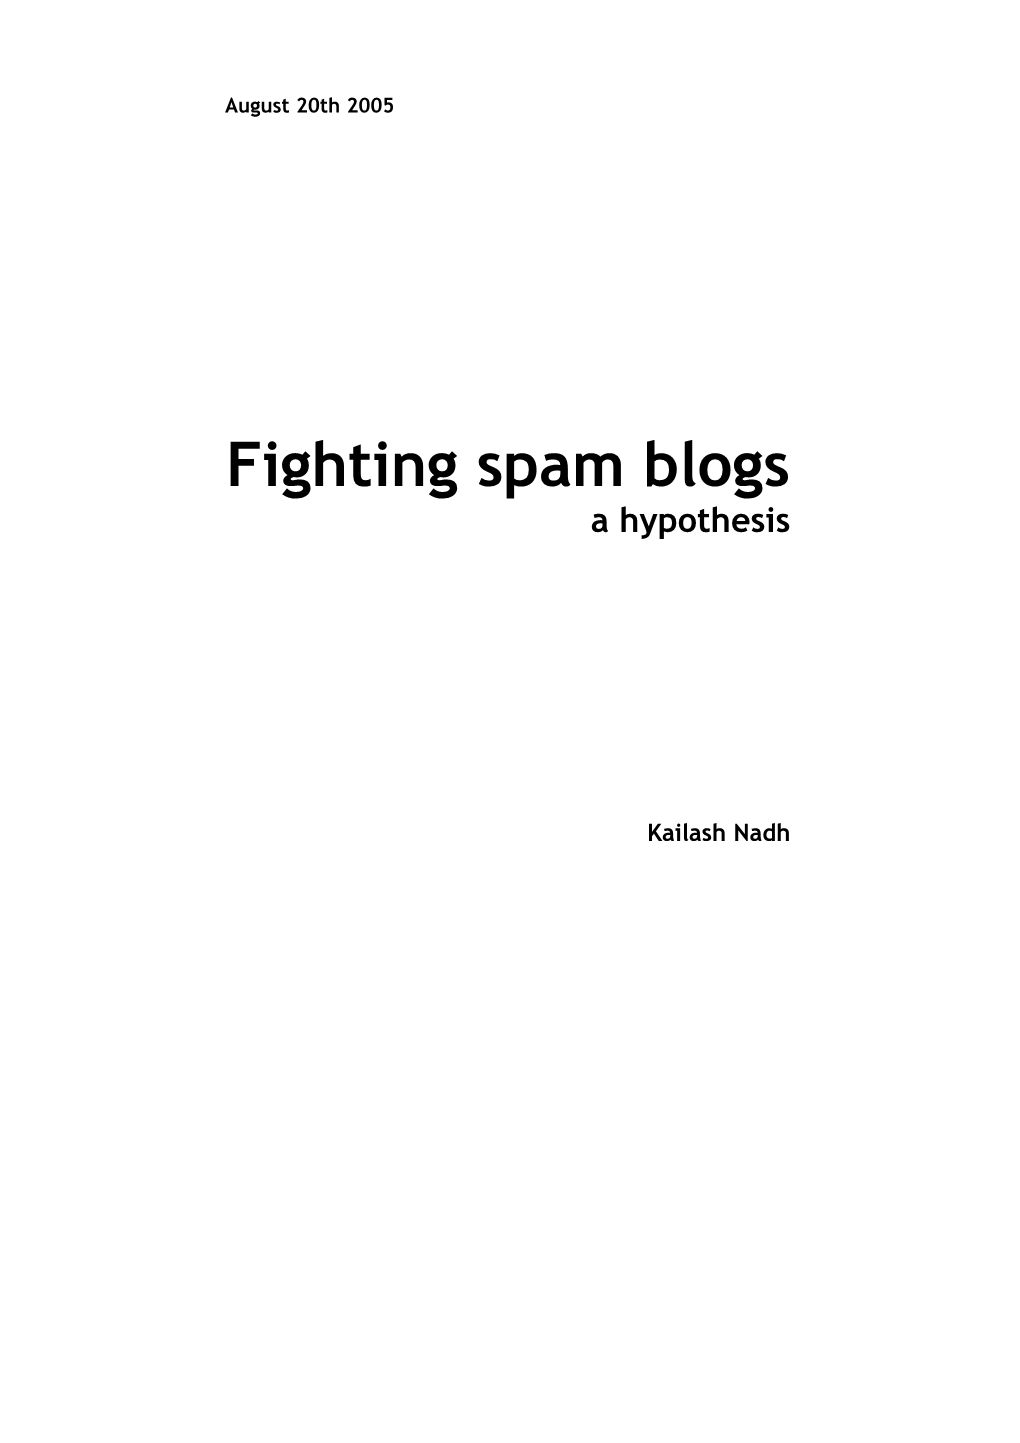 Fighting Spam Blogs a Hypothesis